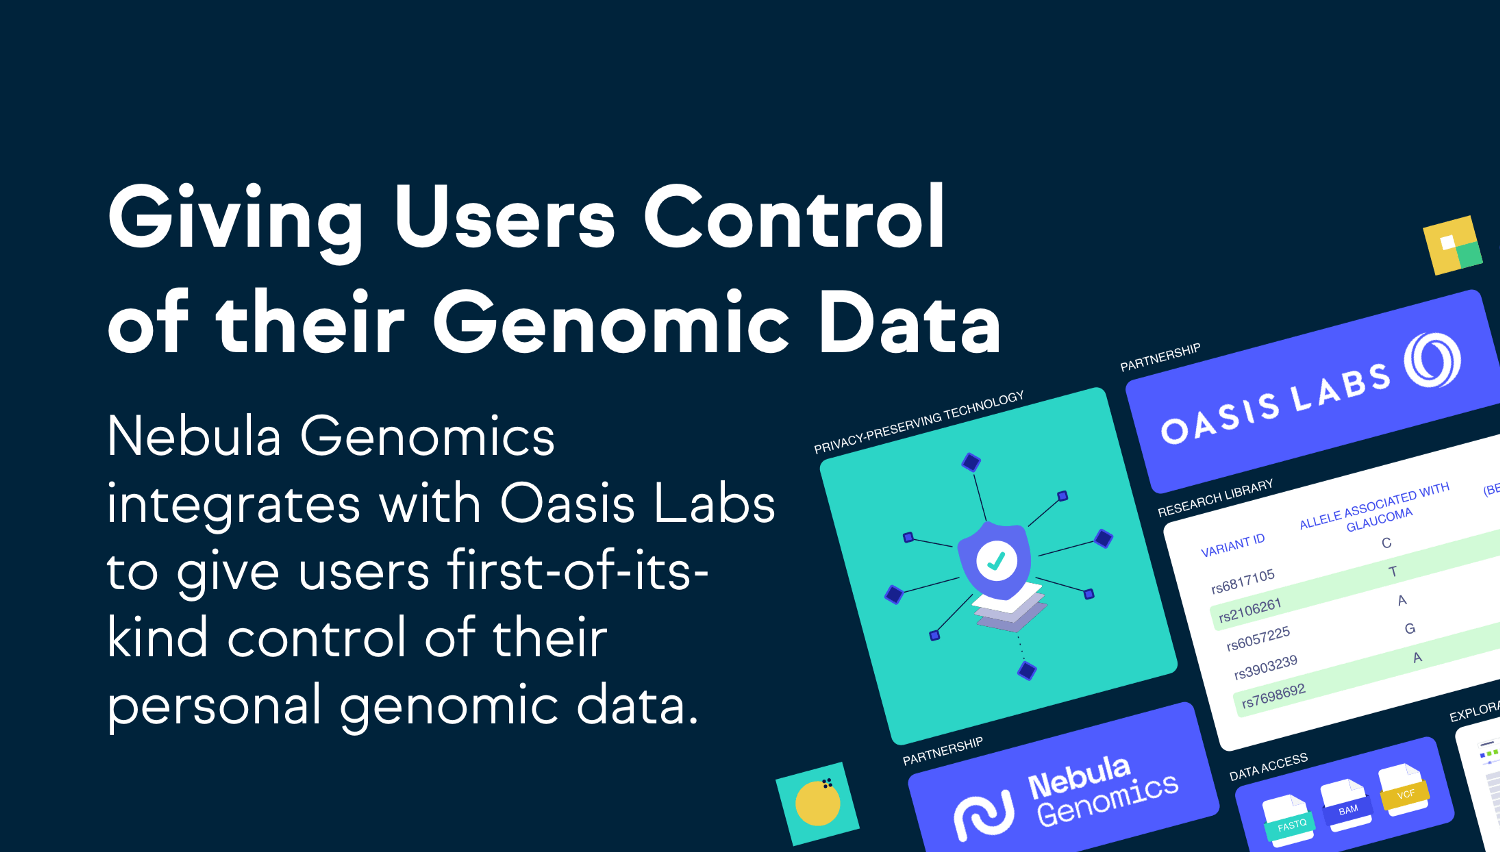 Nebula, Oasis Labs Integrate to Give Users Ownership of Their Personal Genomic Data 